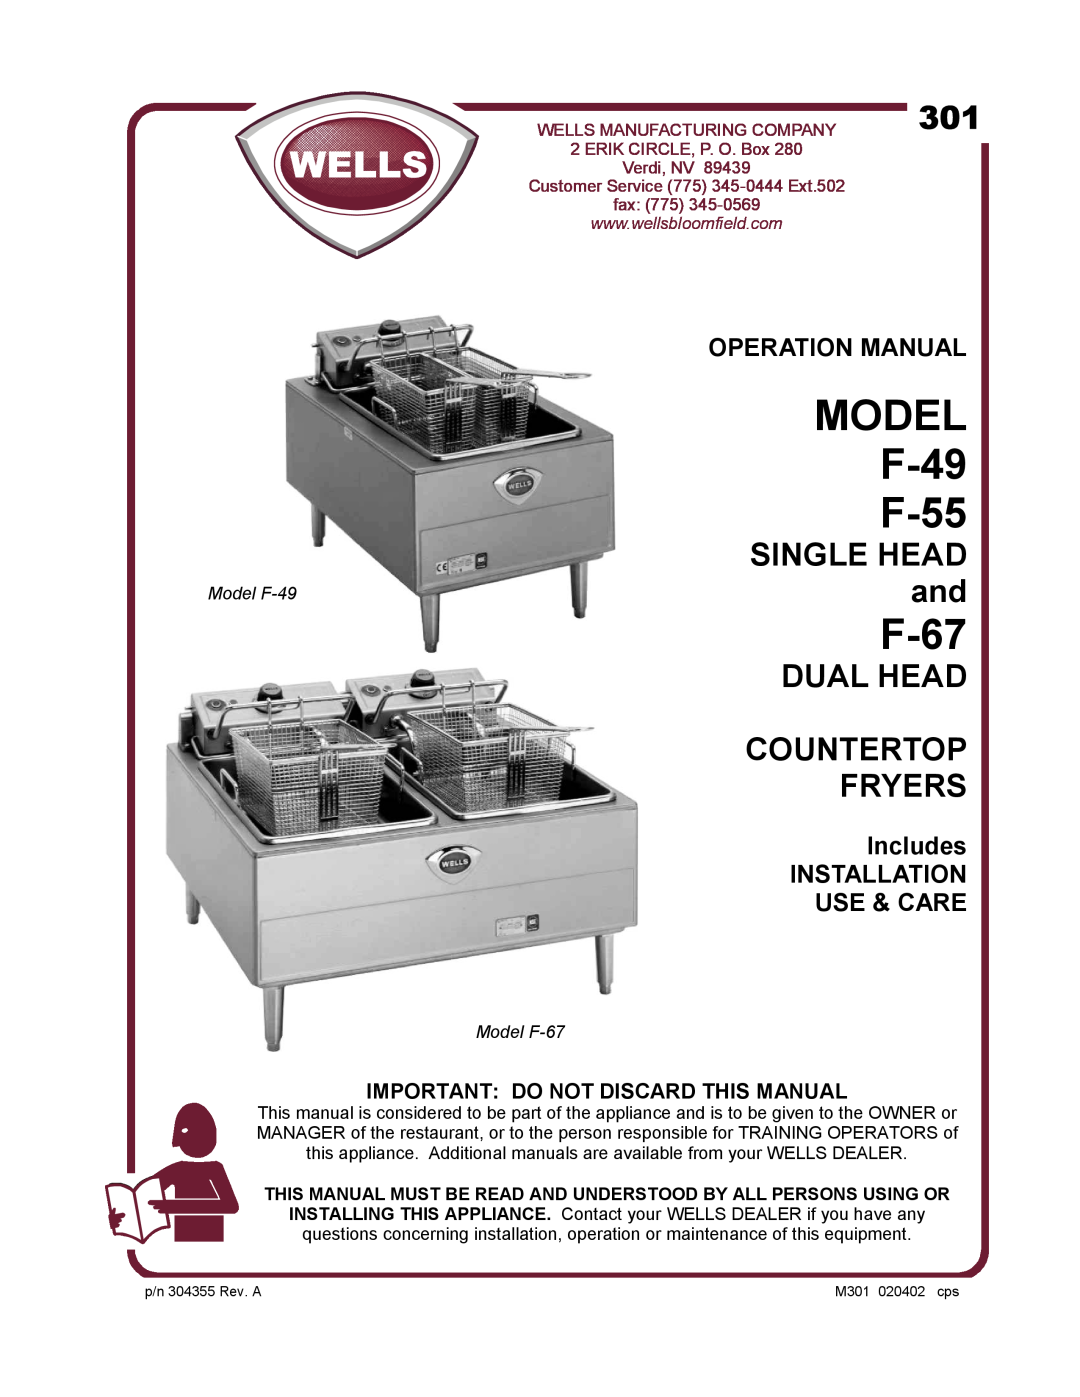 Wells operation manual Includes INSTALLATION USE & CARE, Important Do Not Discard This Manual, MODEL F-49 F-55, F-67 